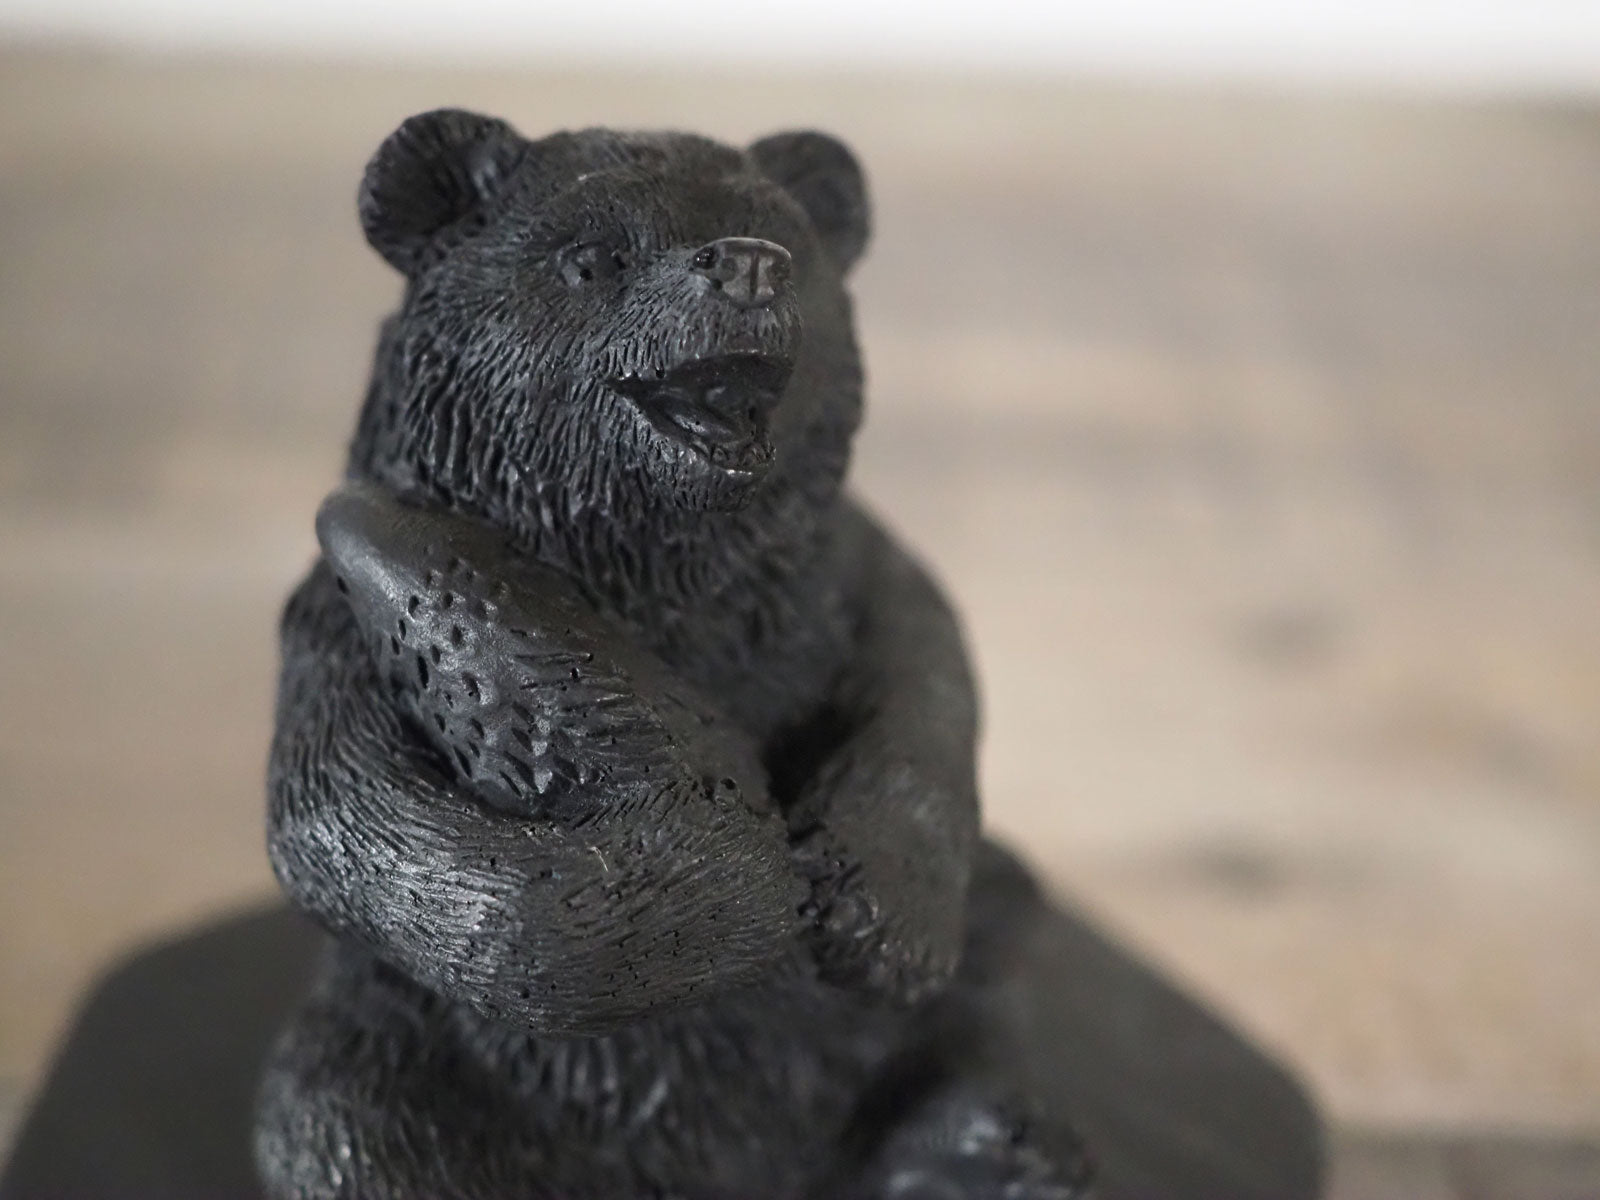 Hand-carved Shungite Bear Carving that is about 4" tall, holding a fish - Closeup